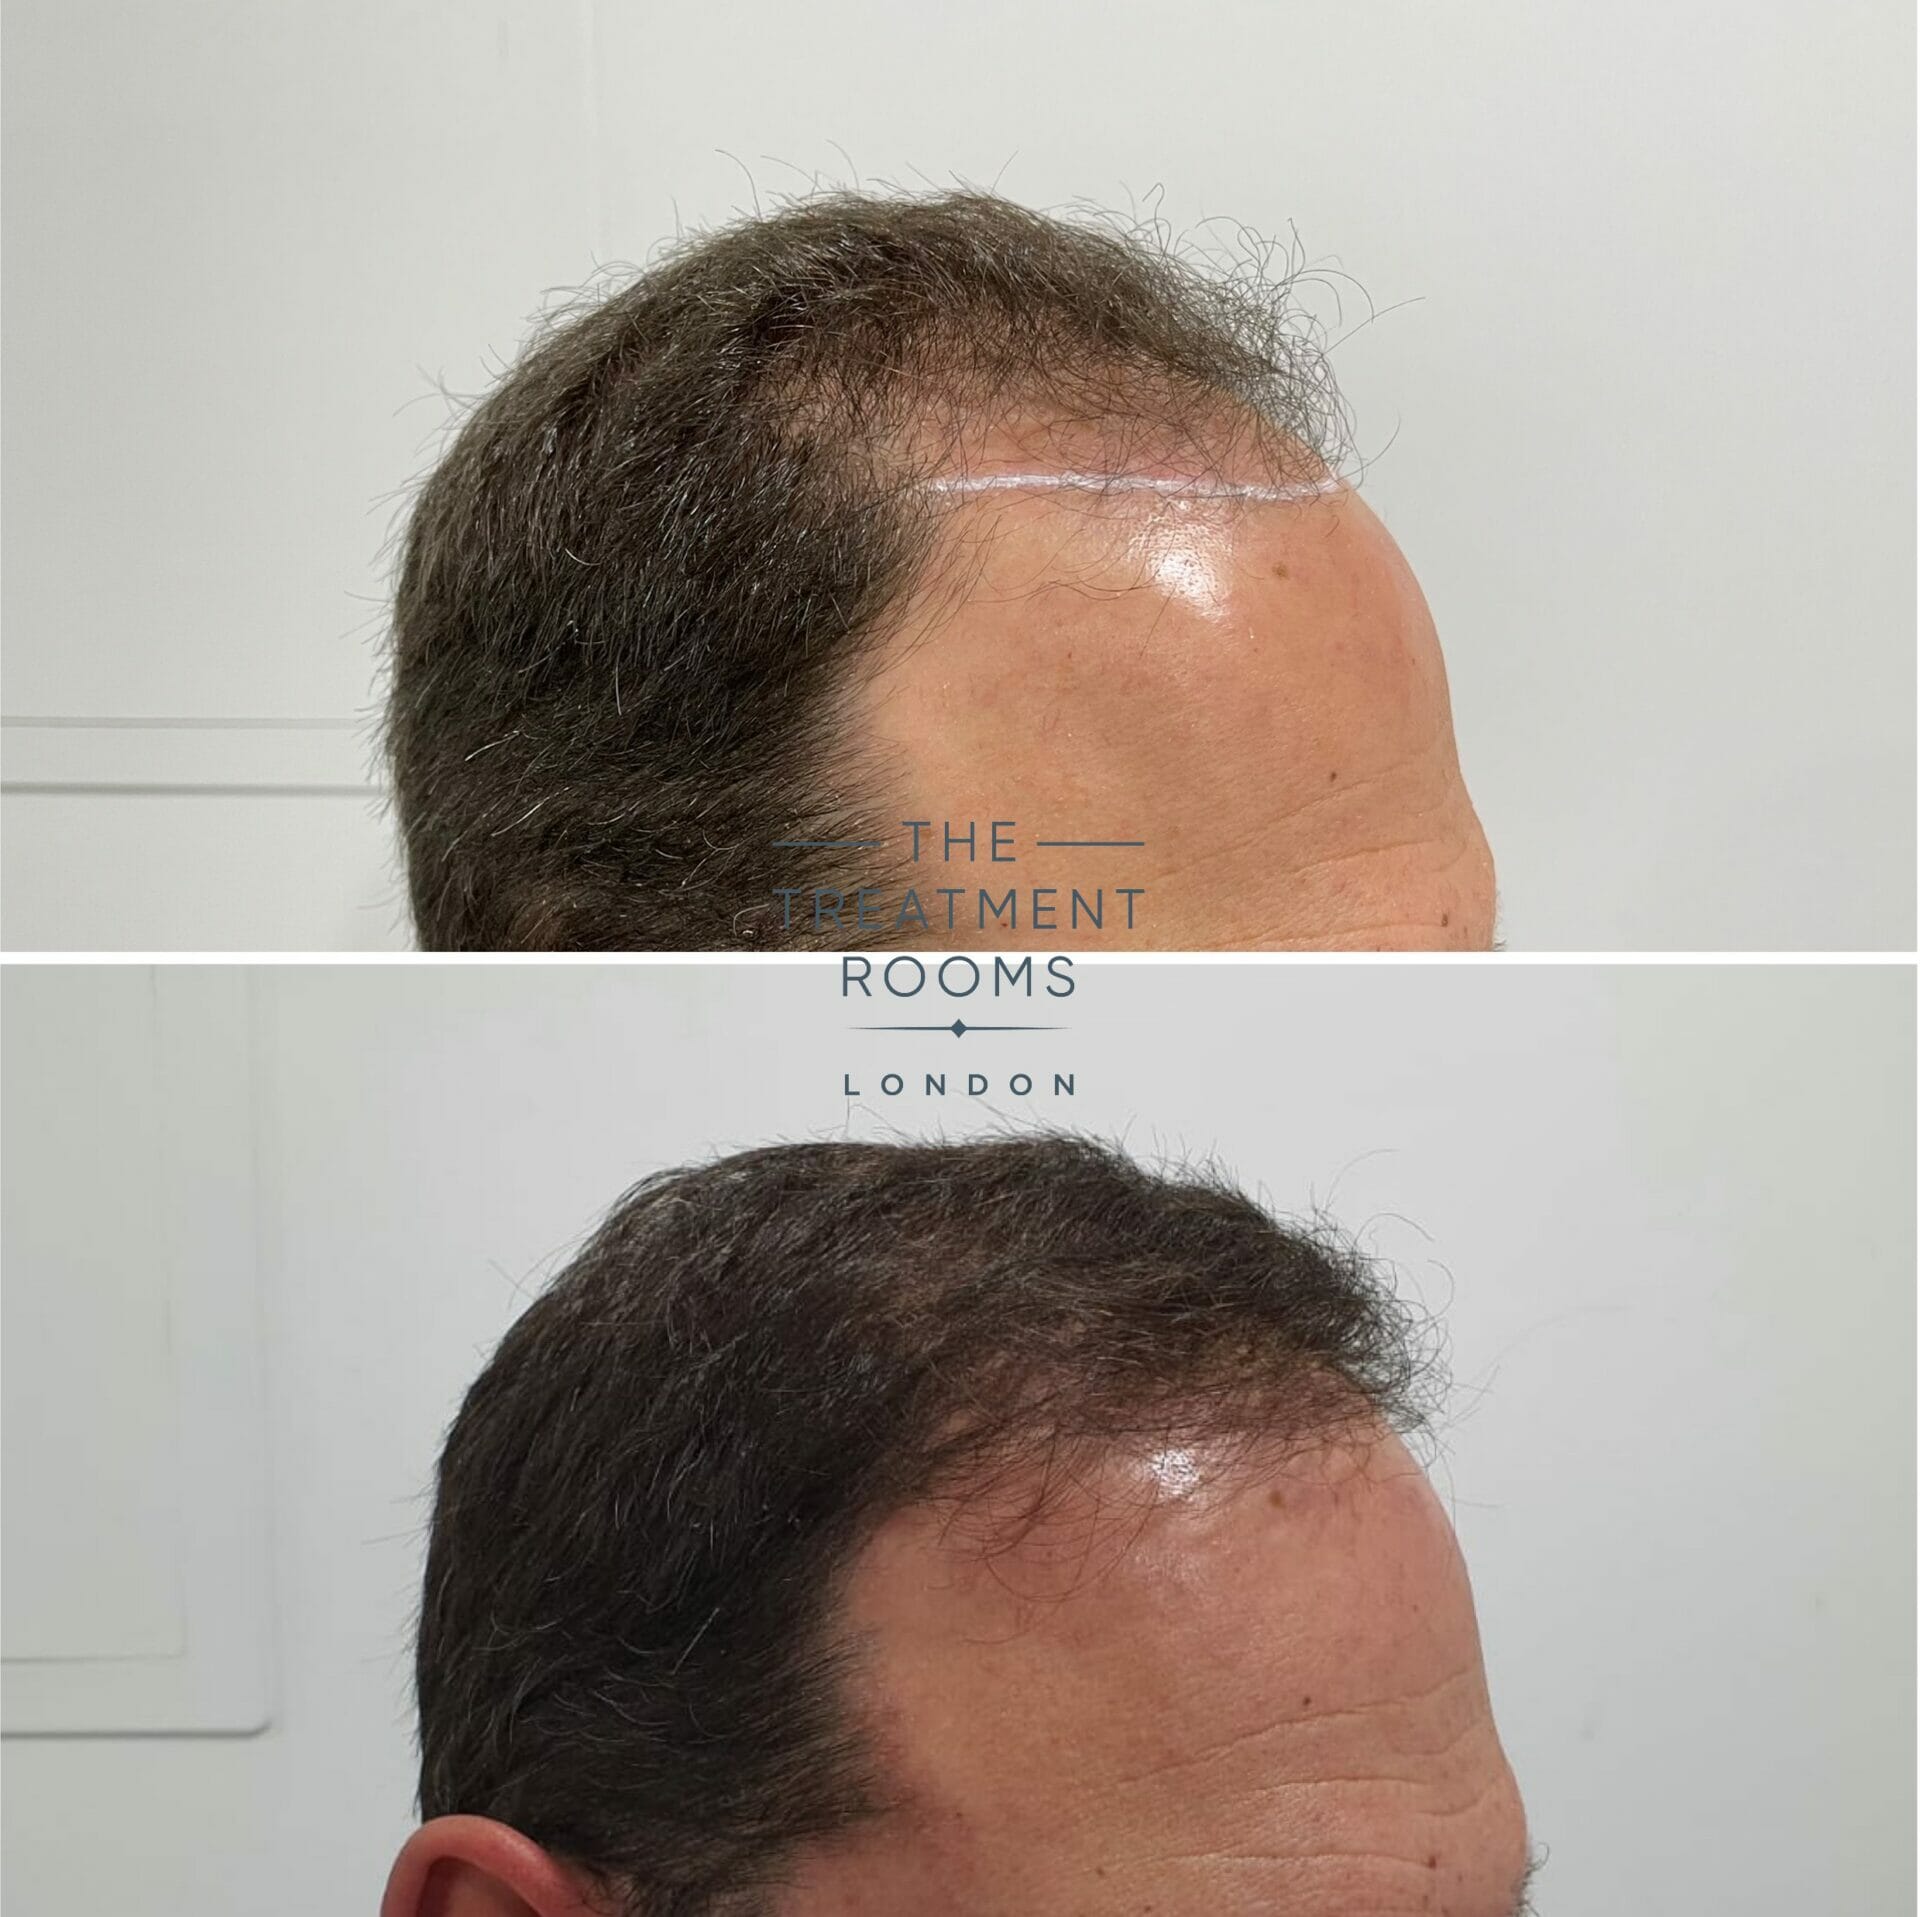 Norwood 4 FUE hair transplant before and after 1930 grafts